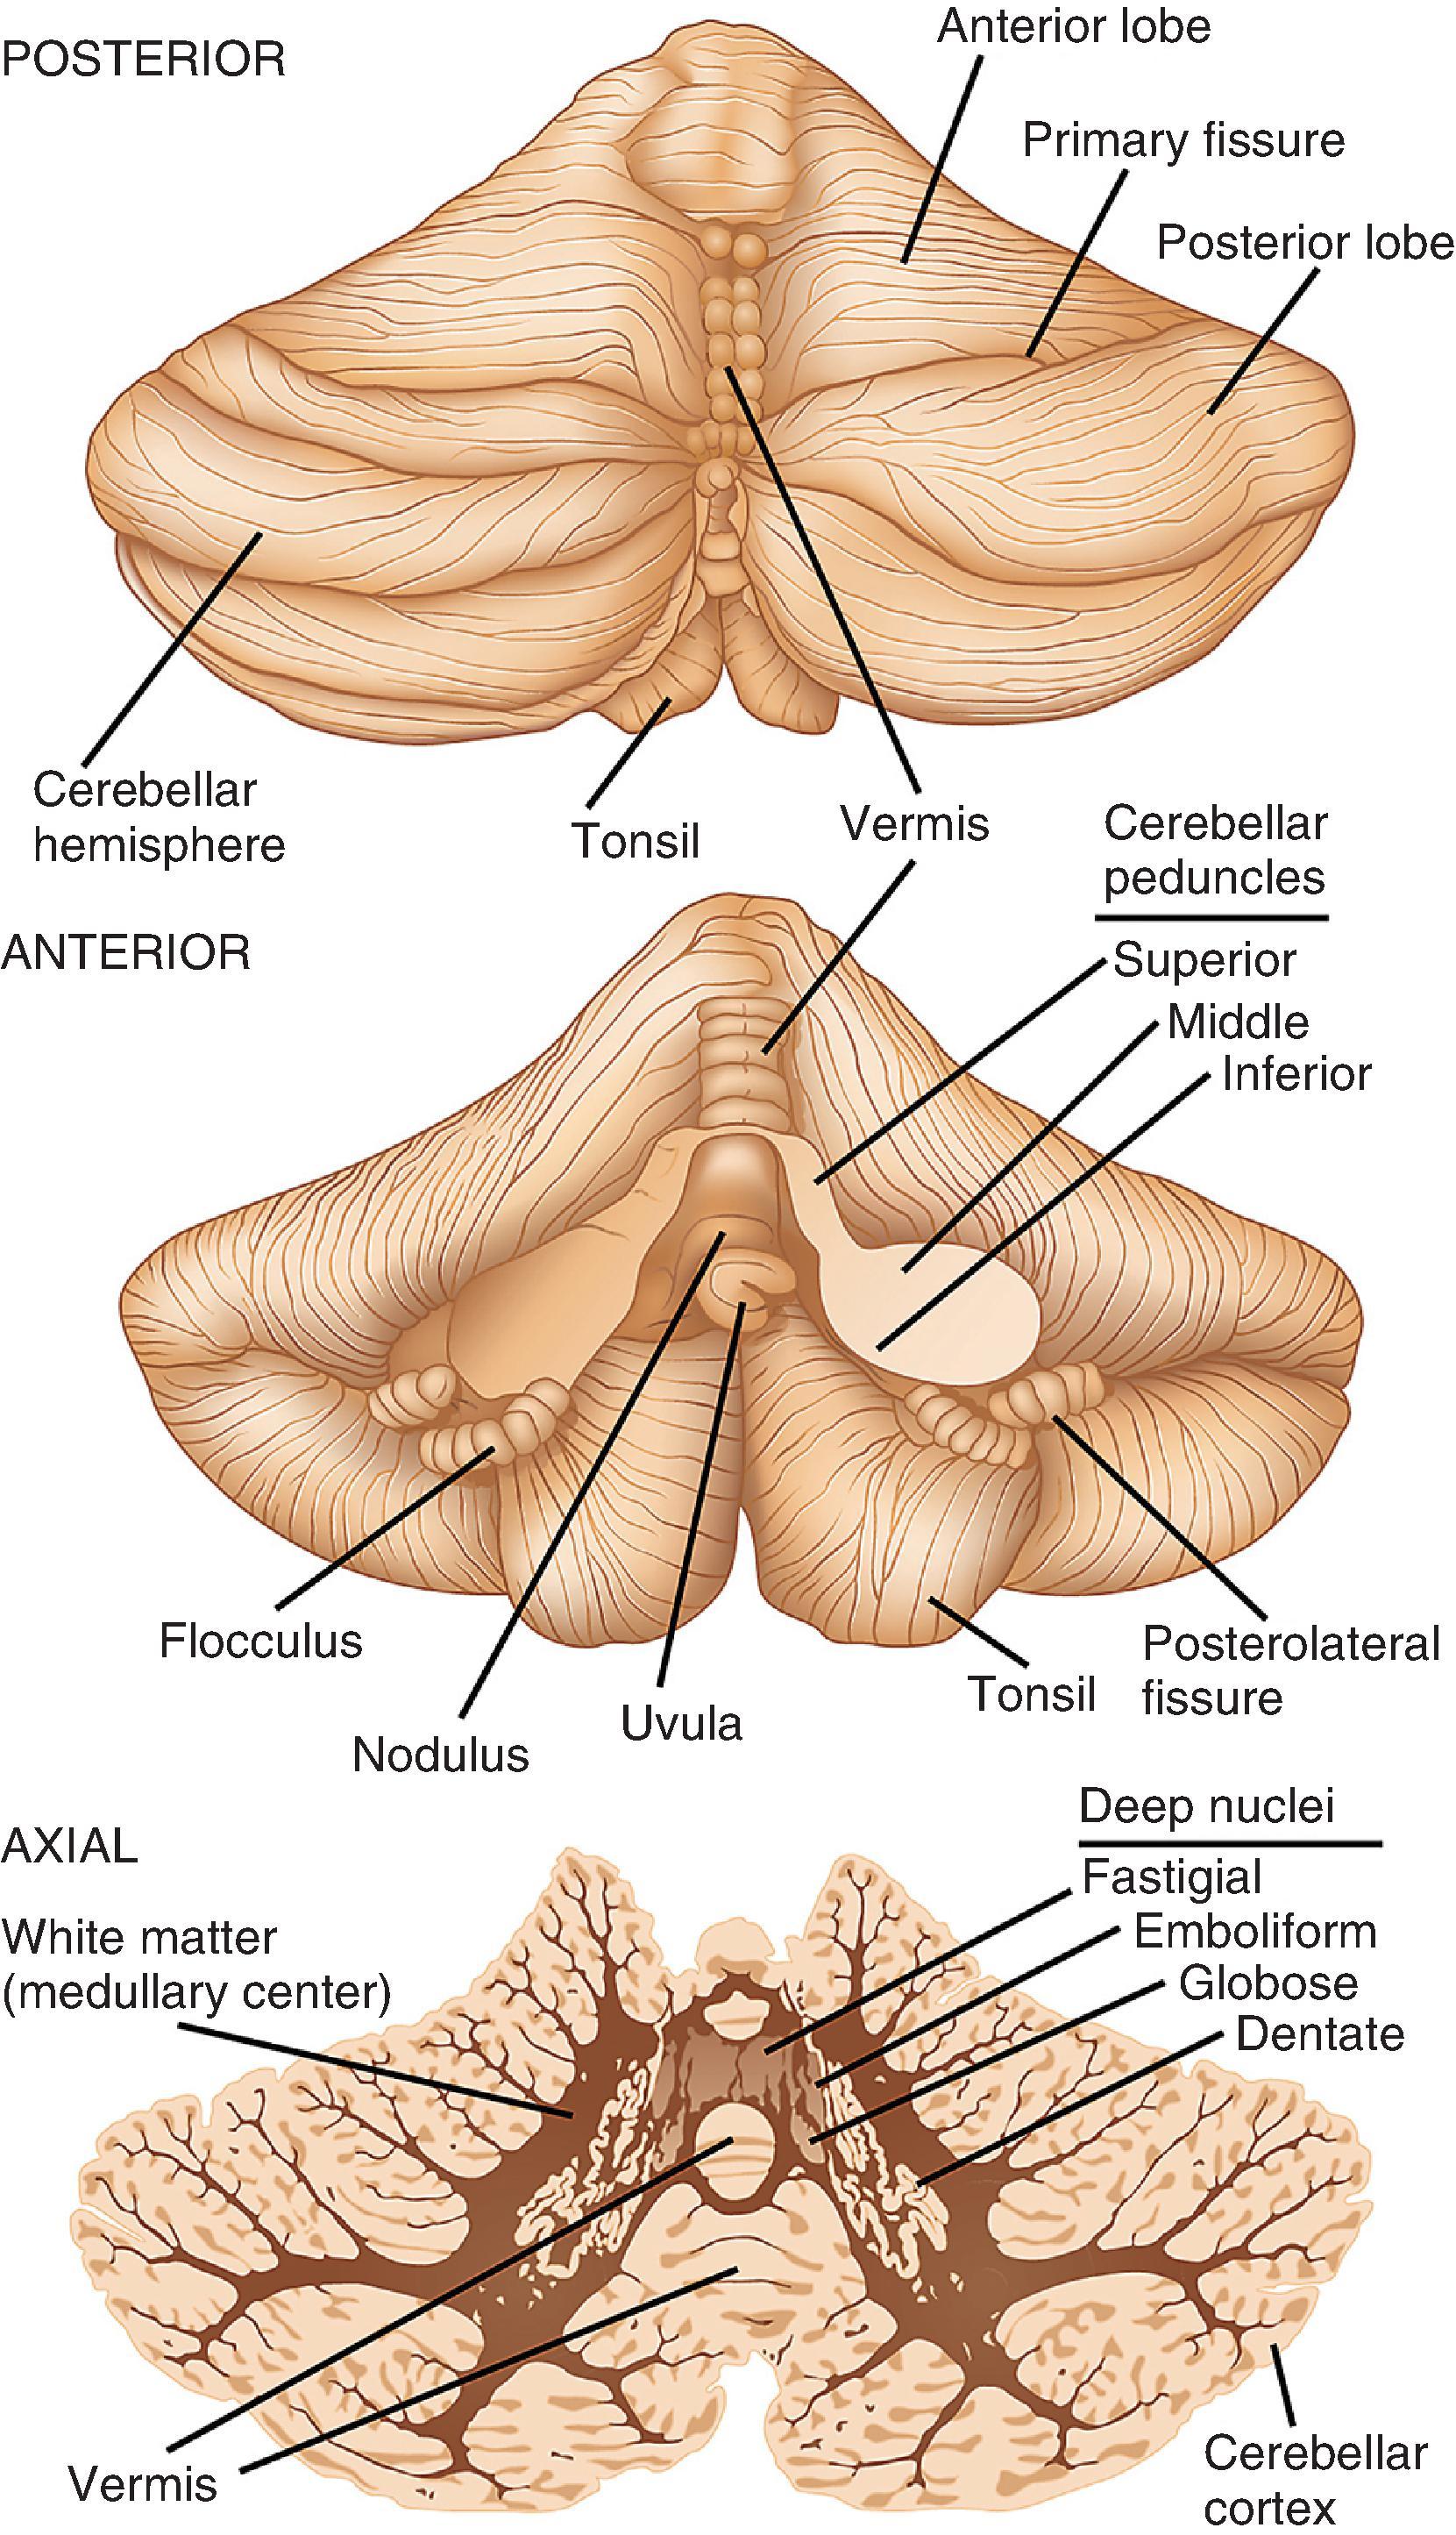 FIGure 1.5, Posterior and anterior views of the cerebellar surface and an axial slice through the mid-cerebellum. The brain stem has been removed for the anterior view of the cerebellum. The ventral surface of the axial slice is pointed upward.